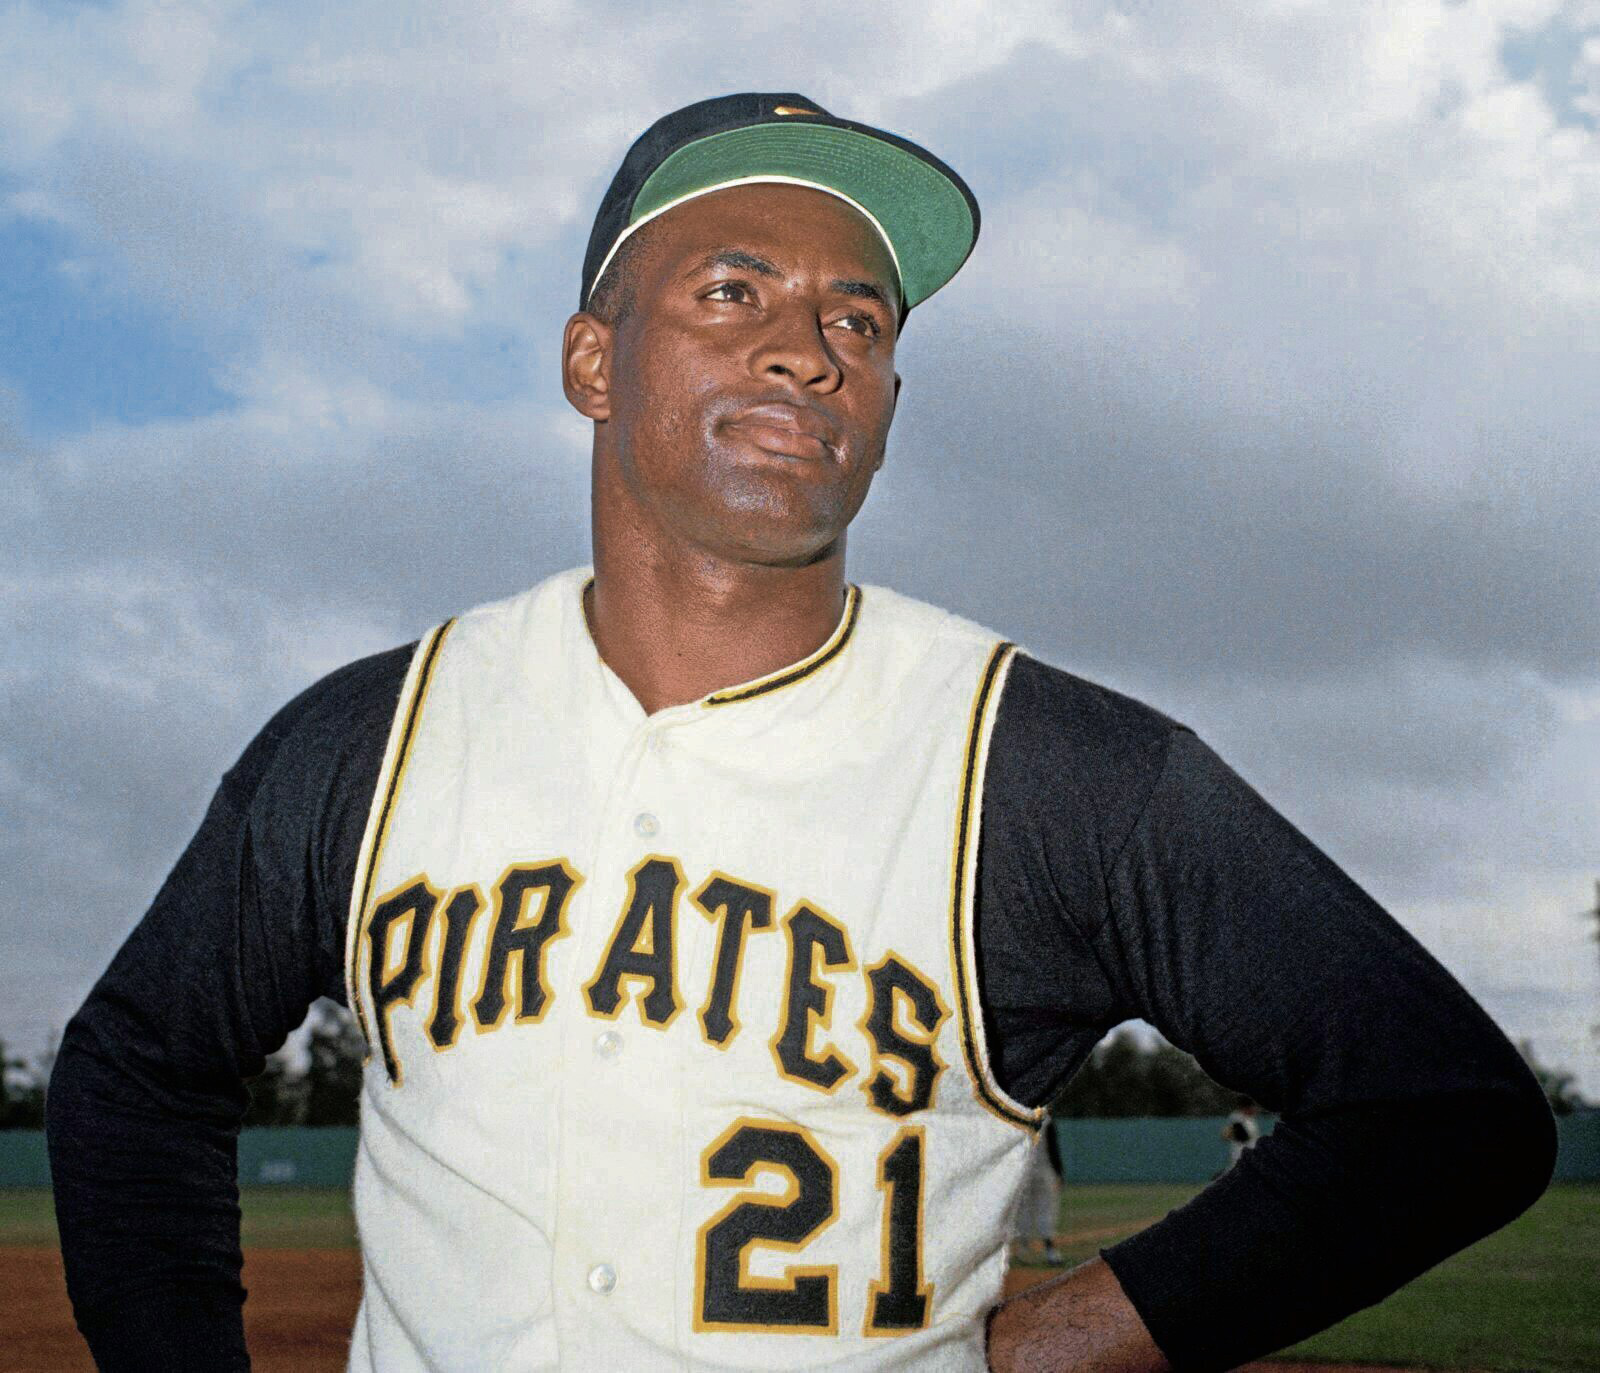 Sept. 9 to honor Roberto Clemente 